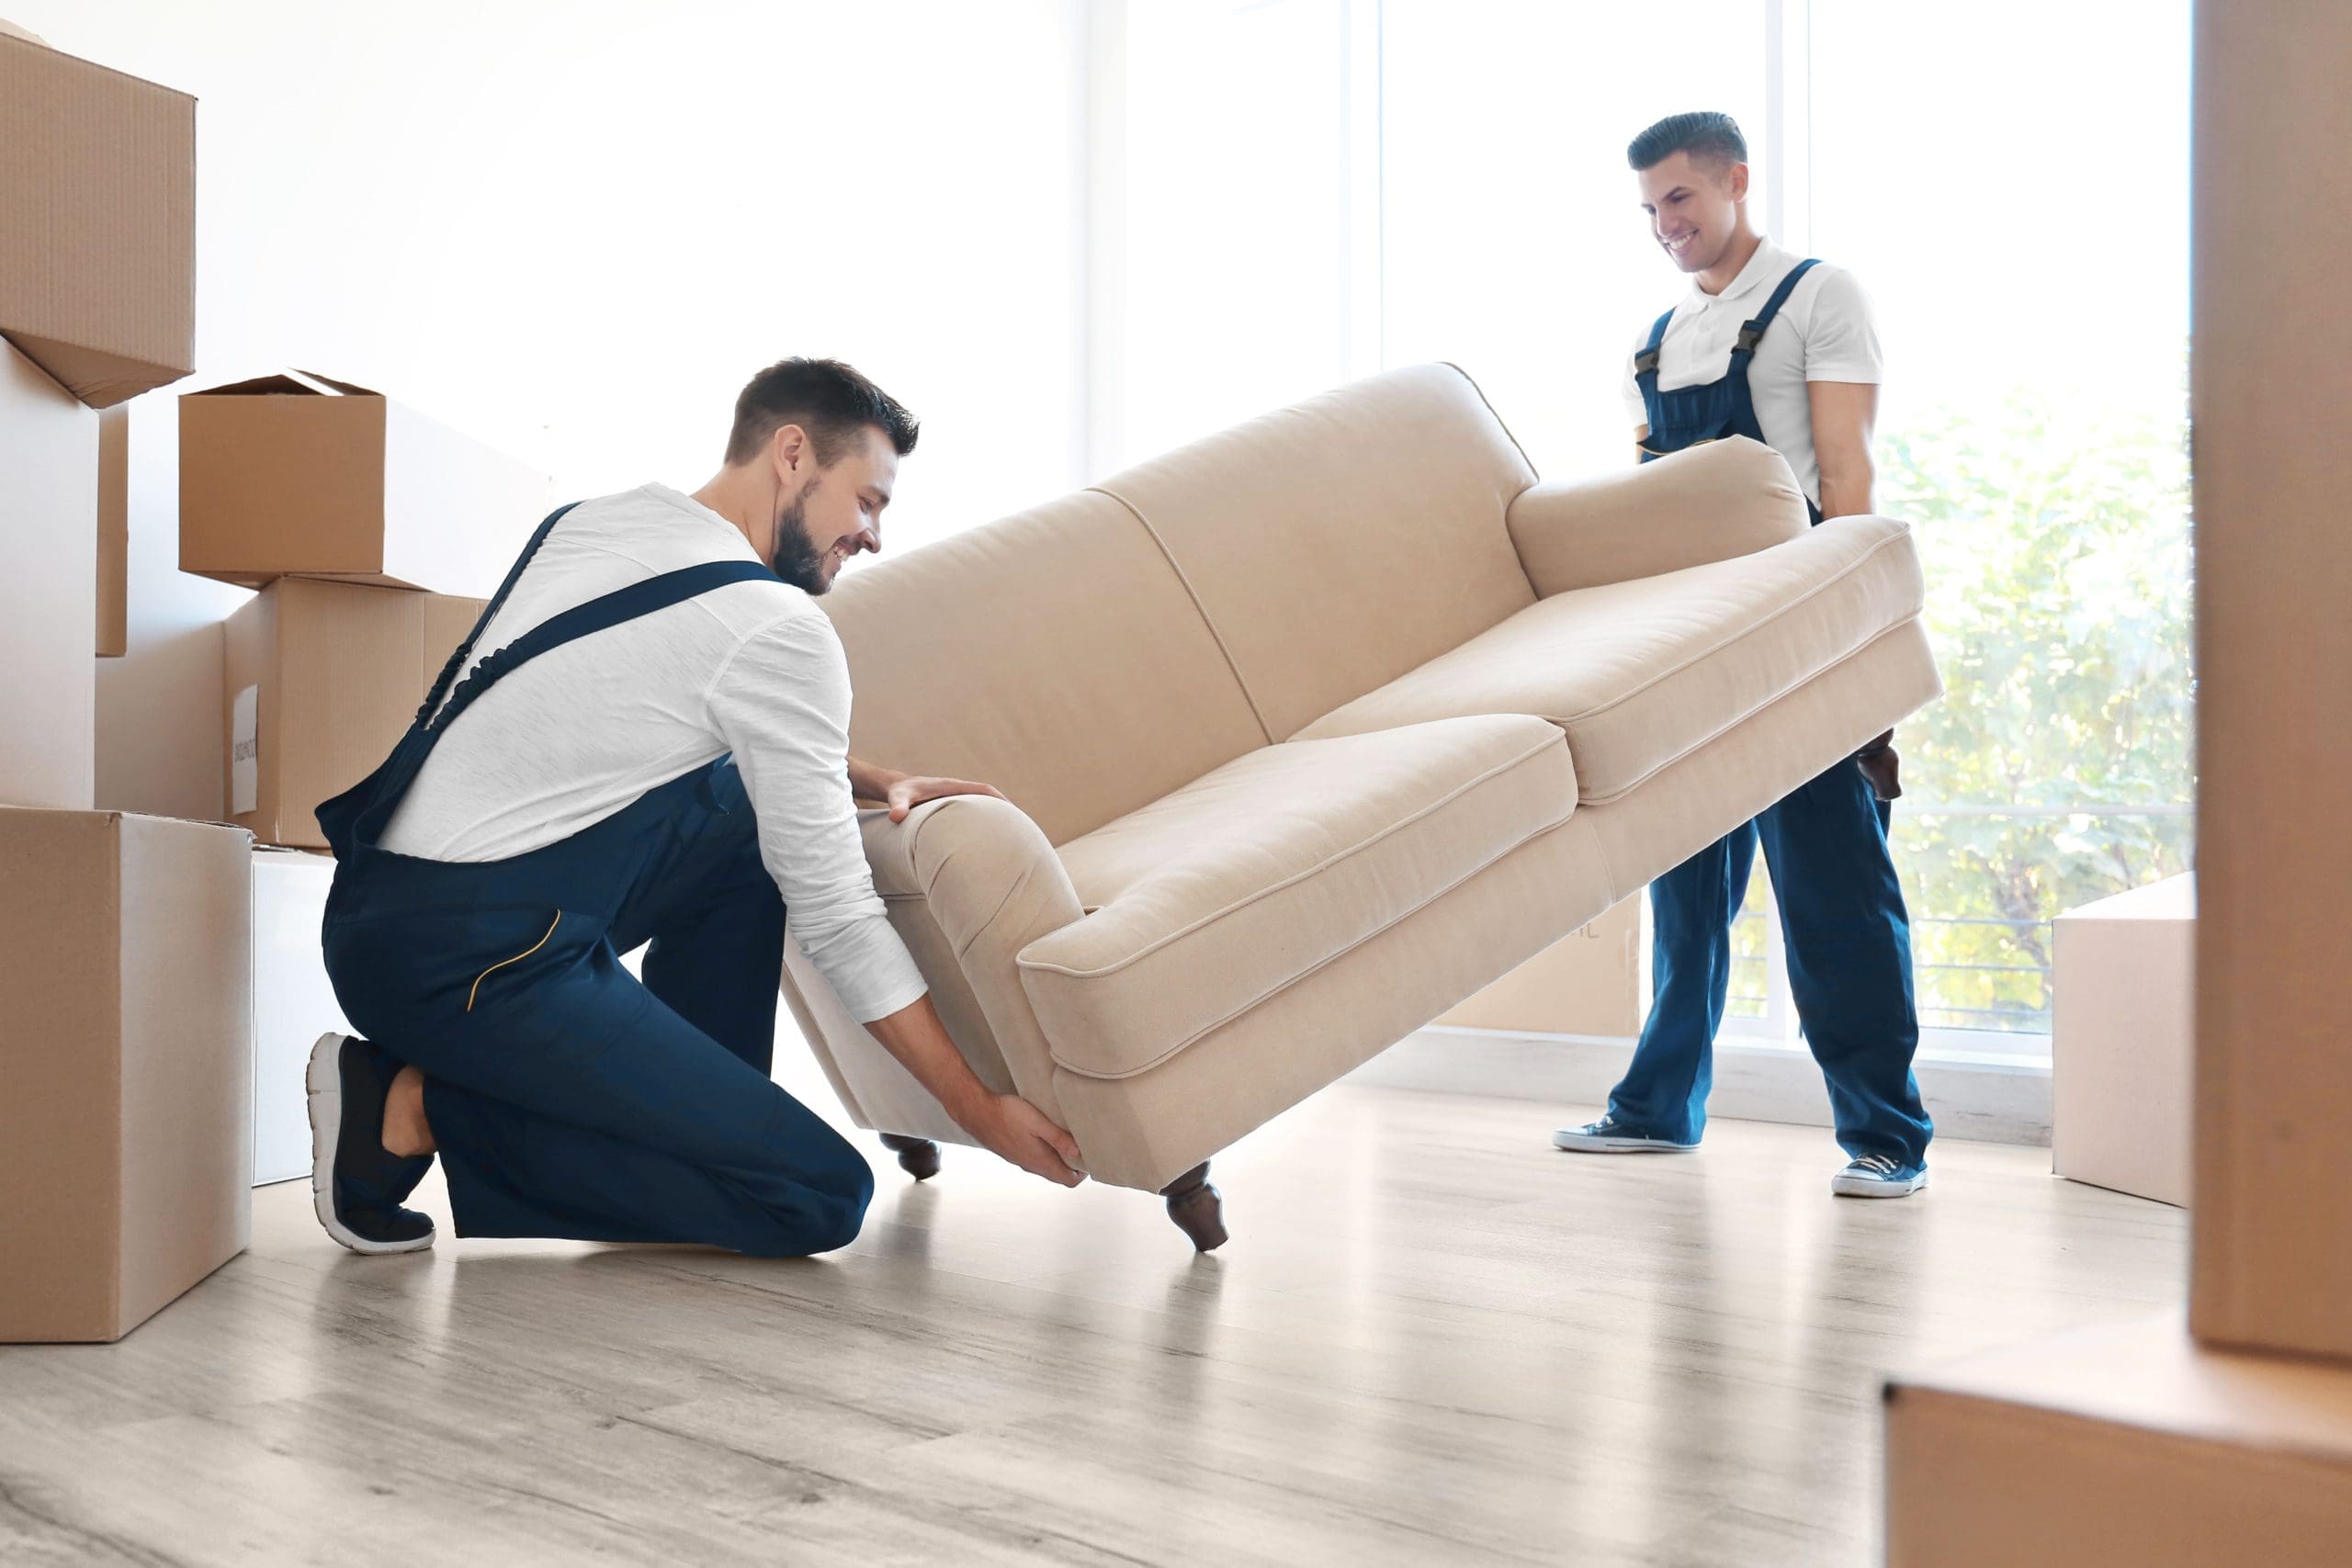 Your same-day furniture delivery checklist. DeliveryApp’s top tips for expert furniture delivery.